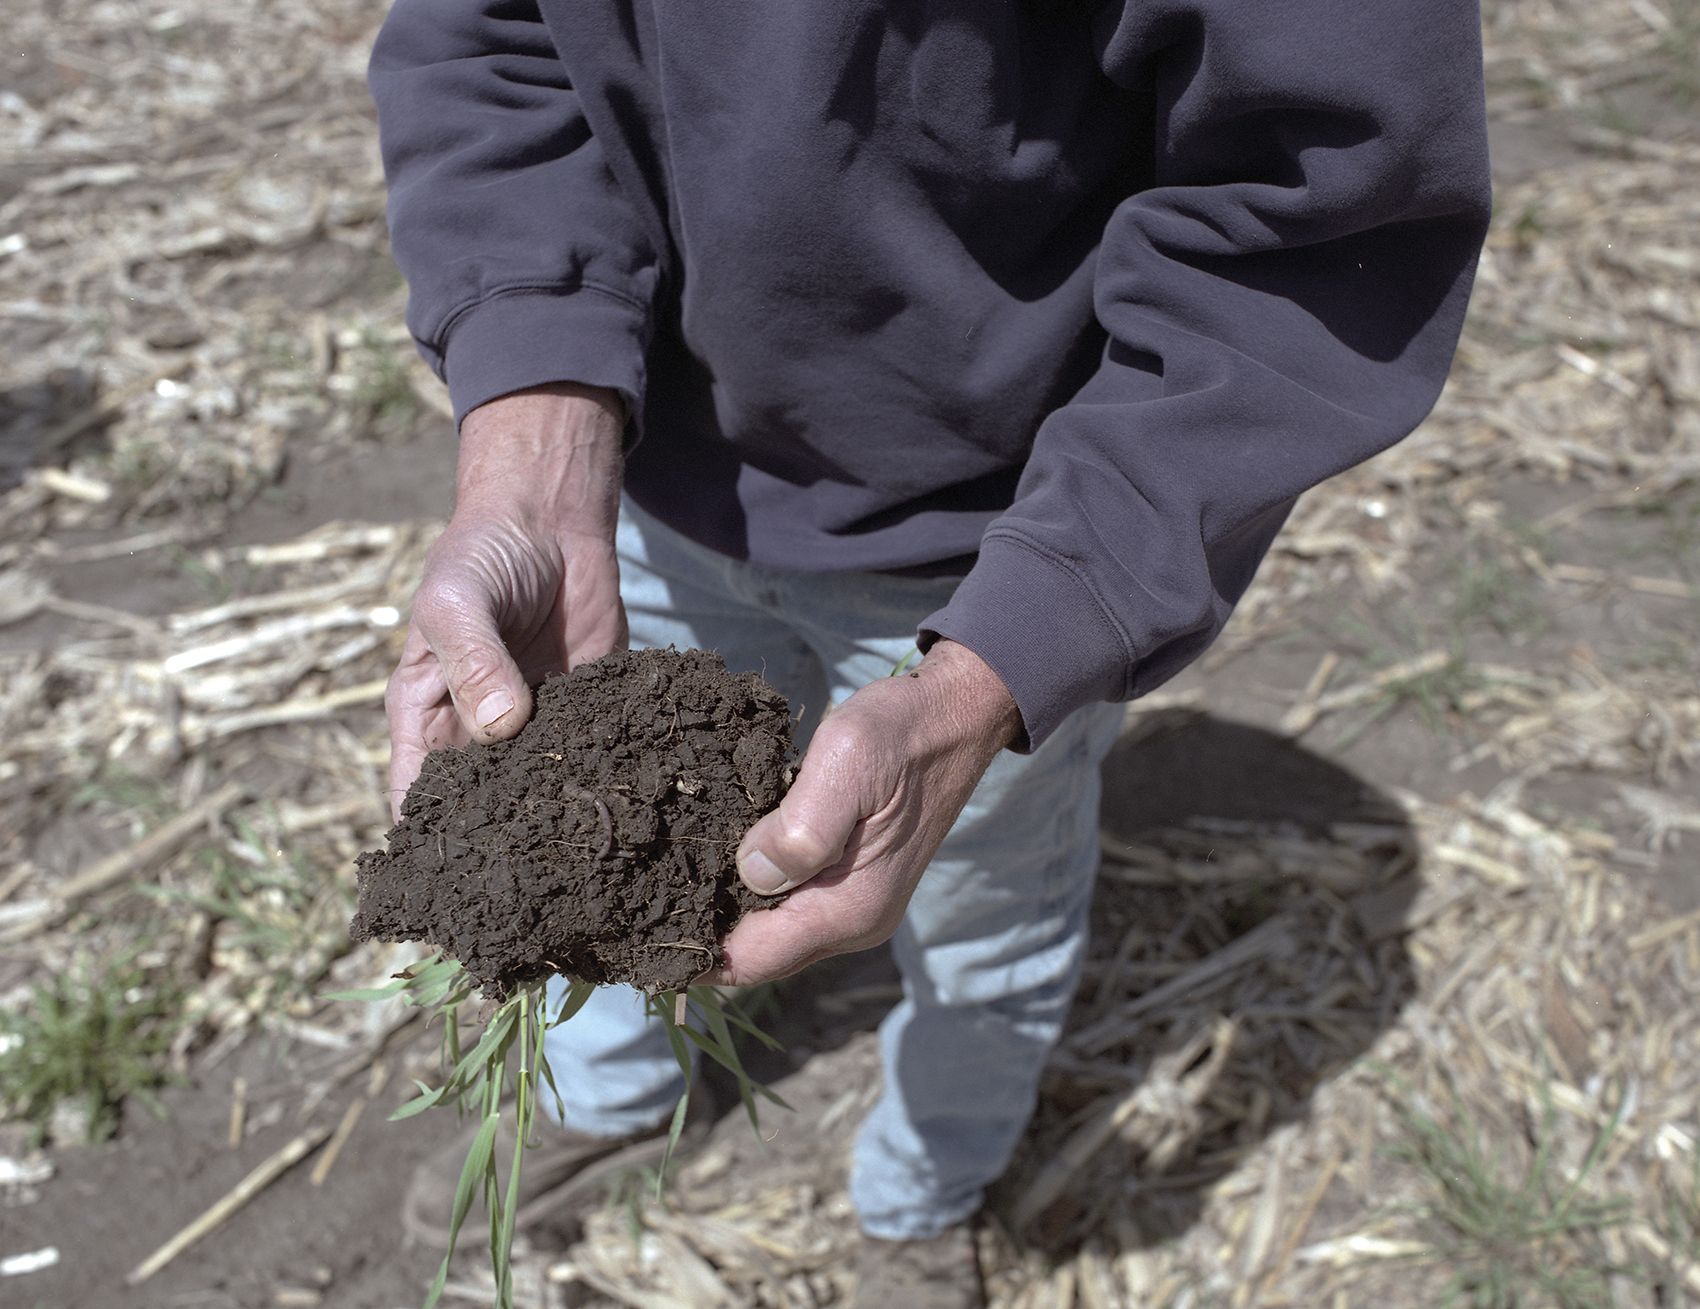 Tim Little shows a patch of healthy soil, rich with earthworms and a new root systems. There are other benefits to cover crops, but they’re hard to quantify and happen over a long timeframe. After five to seven years farmers report better soil health and a higher yield in their primary crops of corn and soybean. Image by Spike Johnson. United States, 2019.